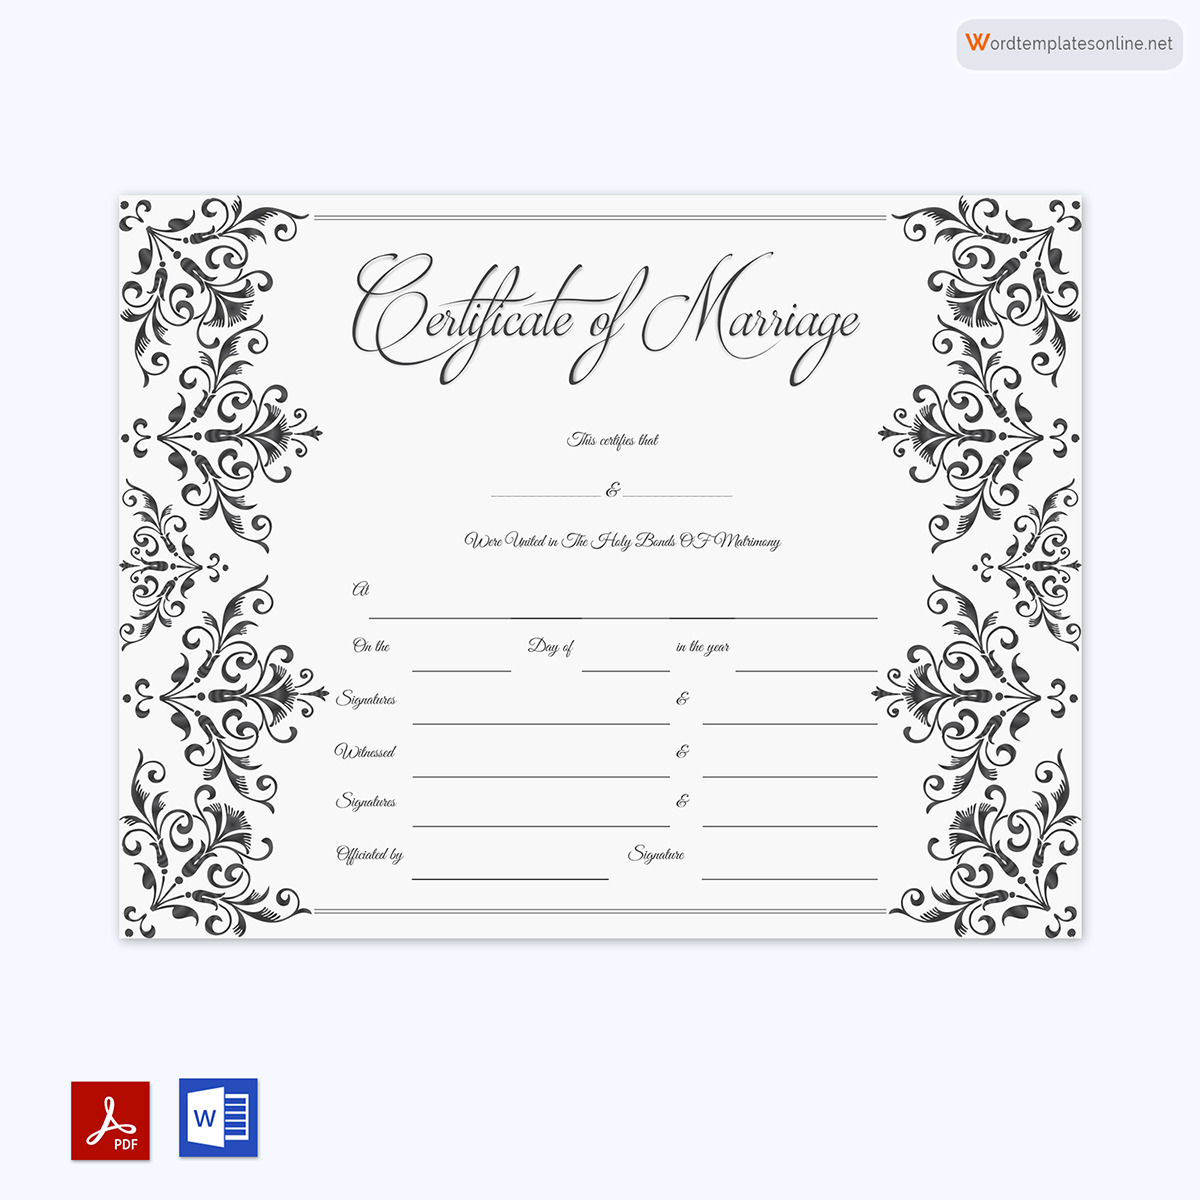 Personalized Marriage Certificate Format